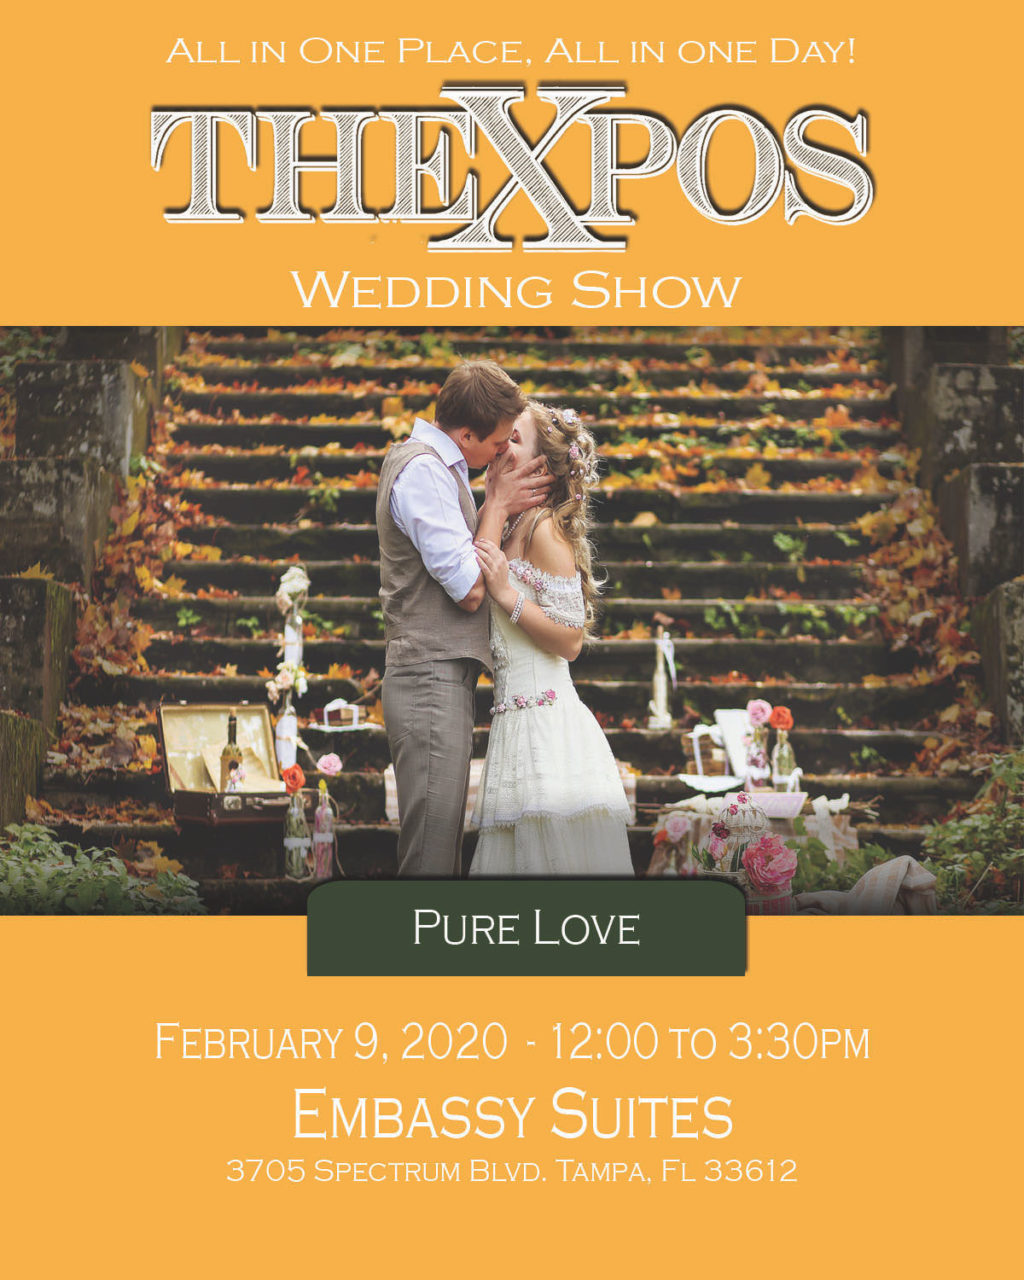 TheXpos Tampa Bay Bridal Show 2020 | Embassy Suites Tampa USF February 9, 2020